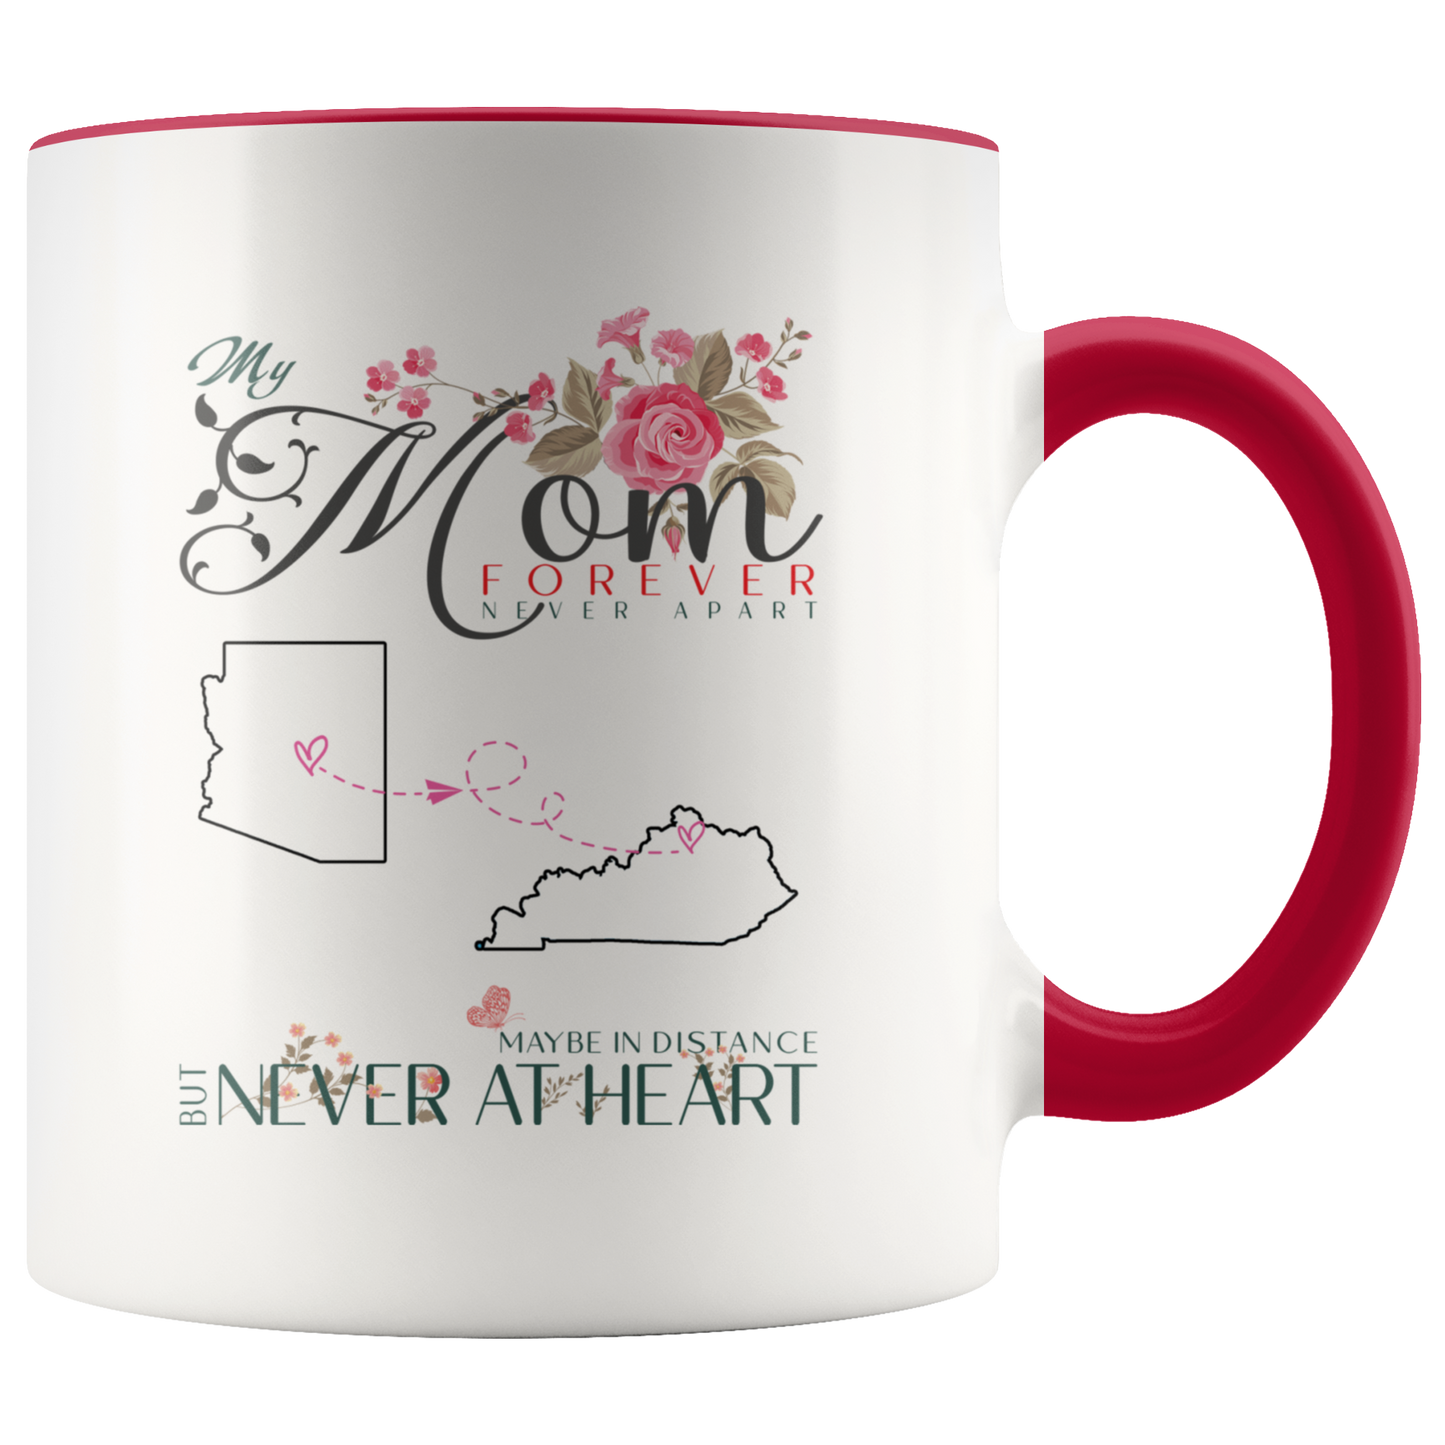 M-20321571-sp-23900 - [ Arizona | Kentucky ]Personalized Mothers Day Coffee Mug - My Mom Forever Never A